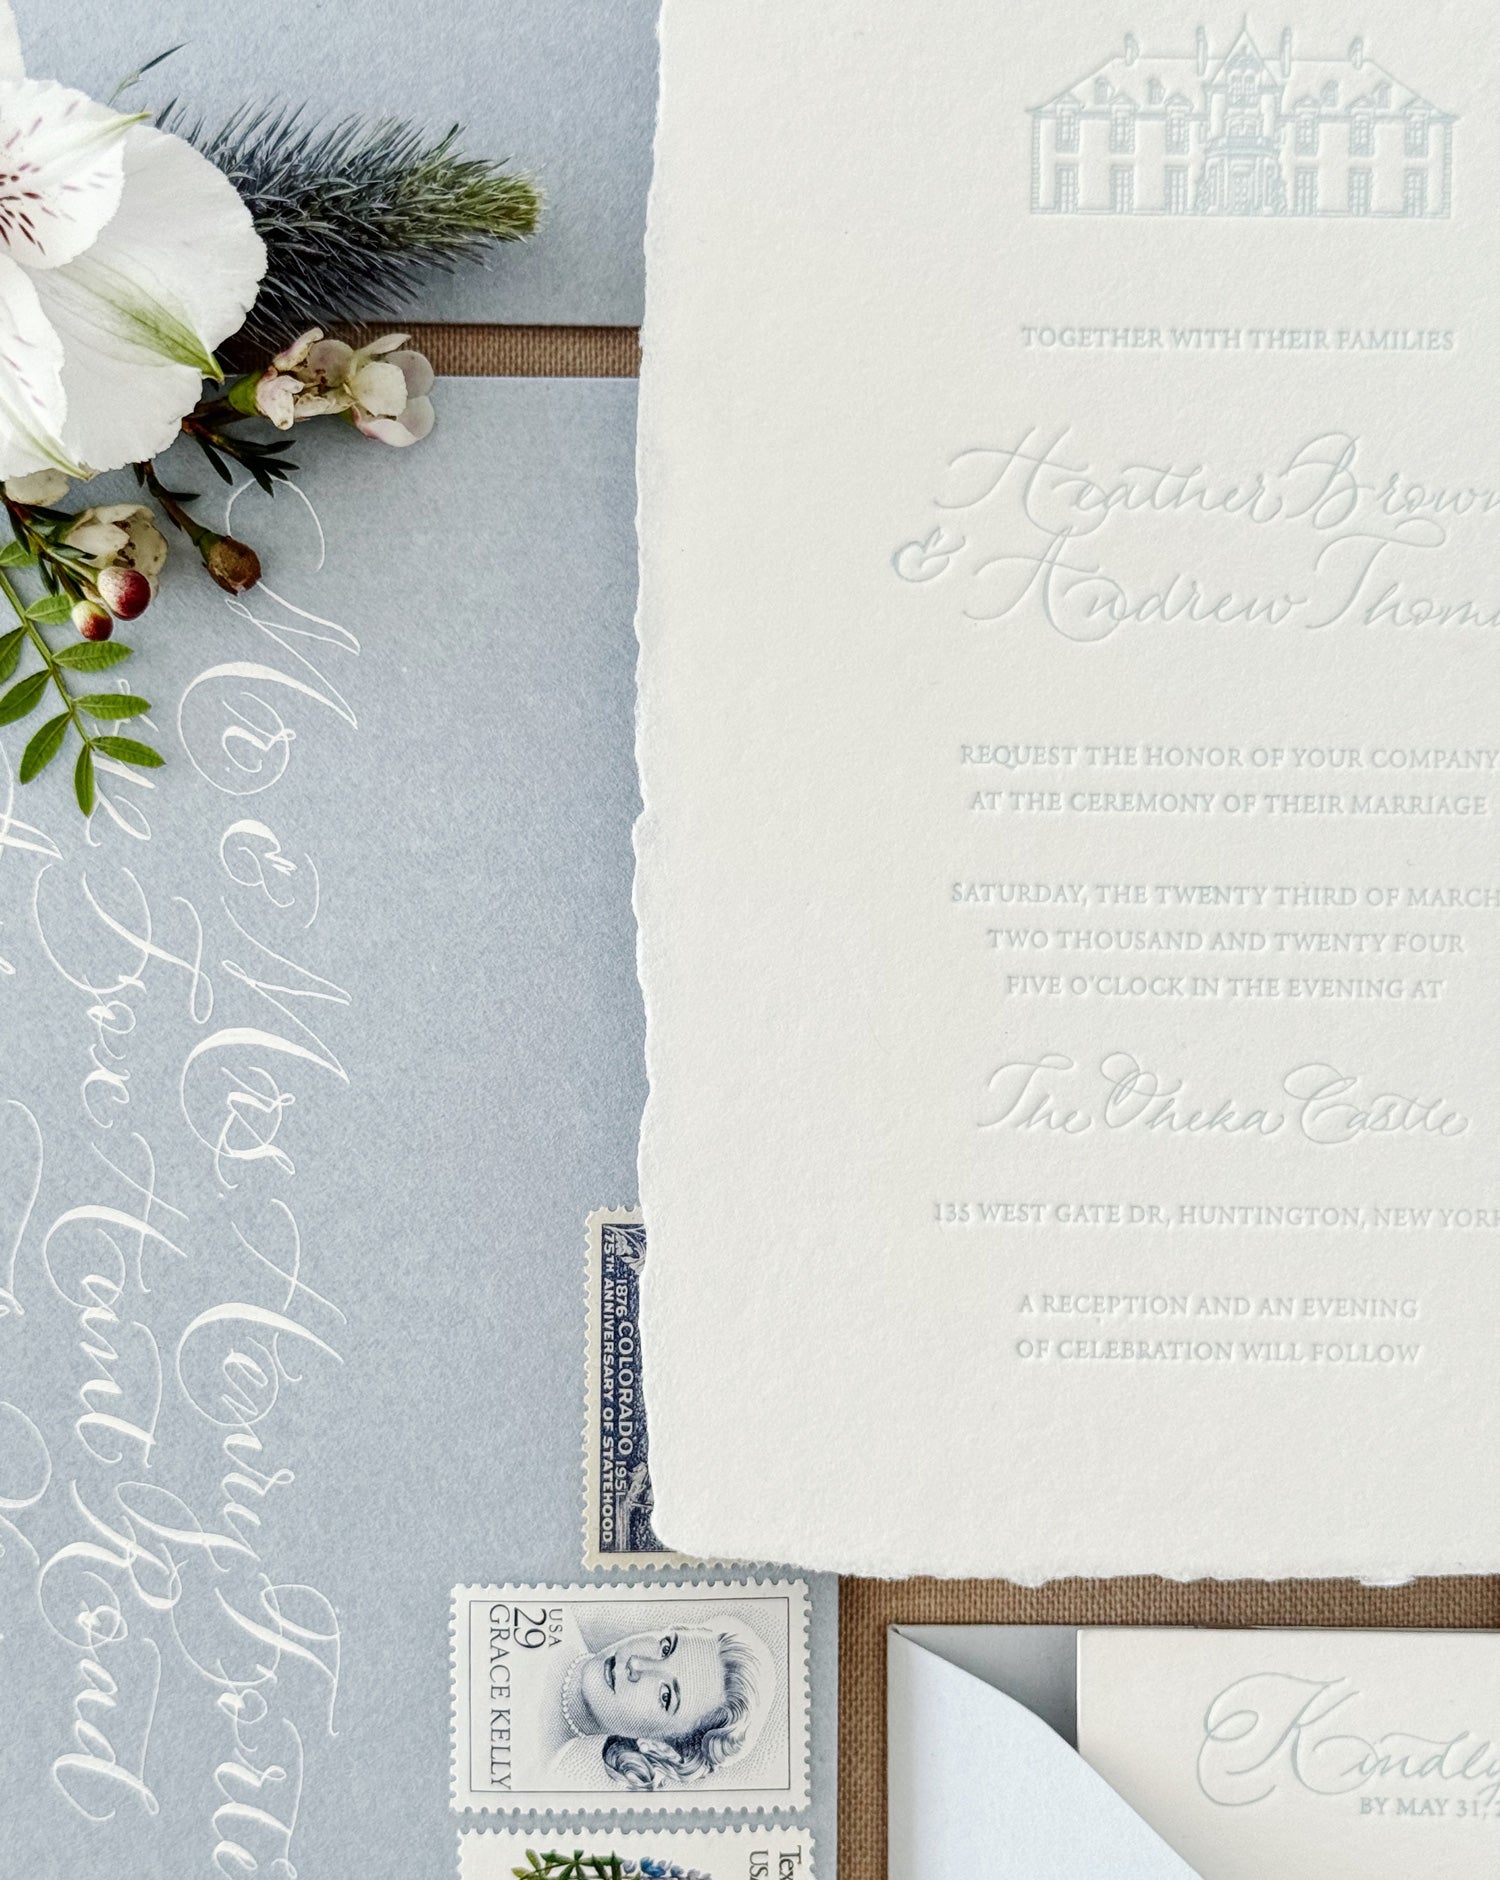 Elevate your wedding invitations with hot foil printing on handmade paper. Explore expert advice and captivating designs in our latest article.